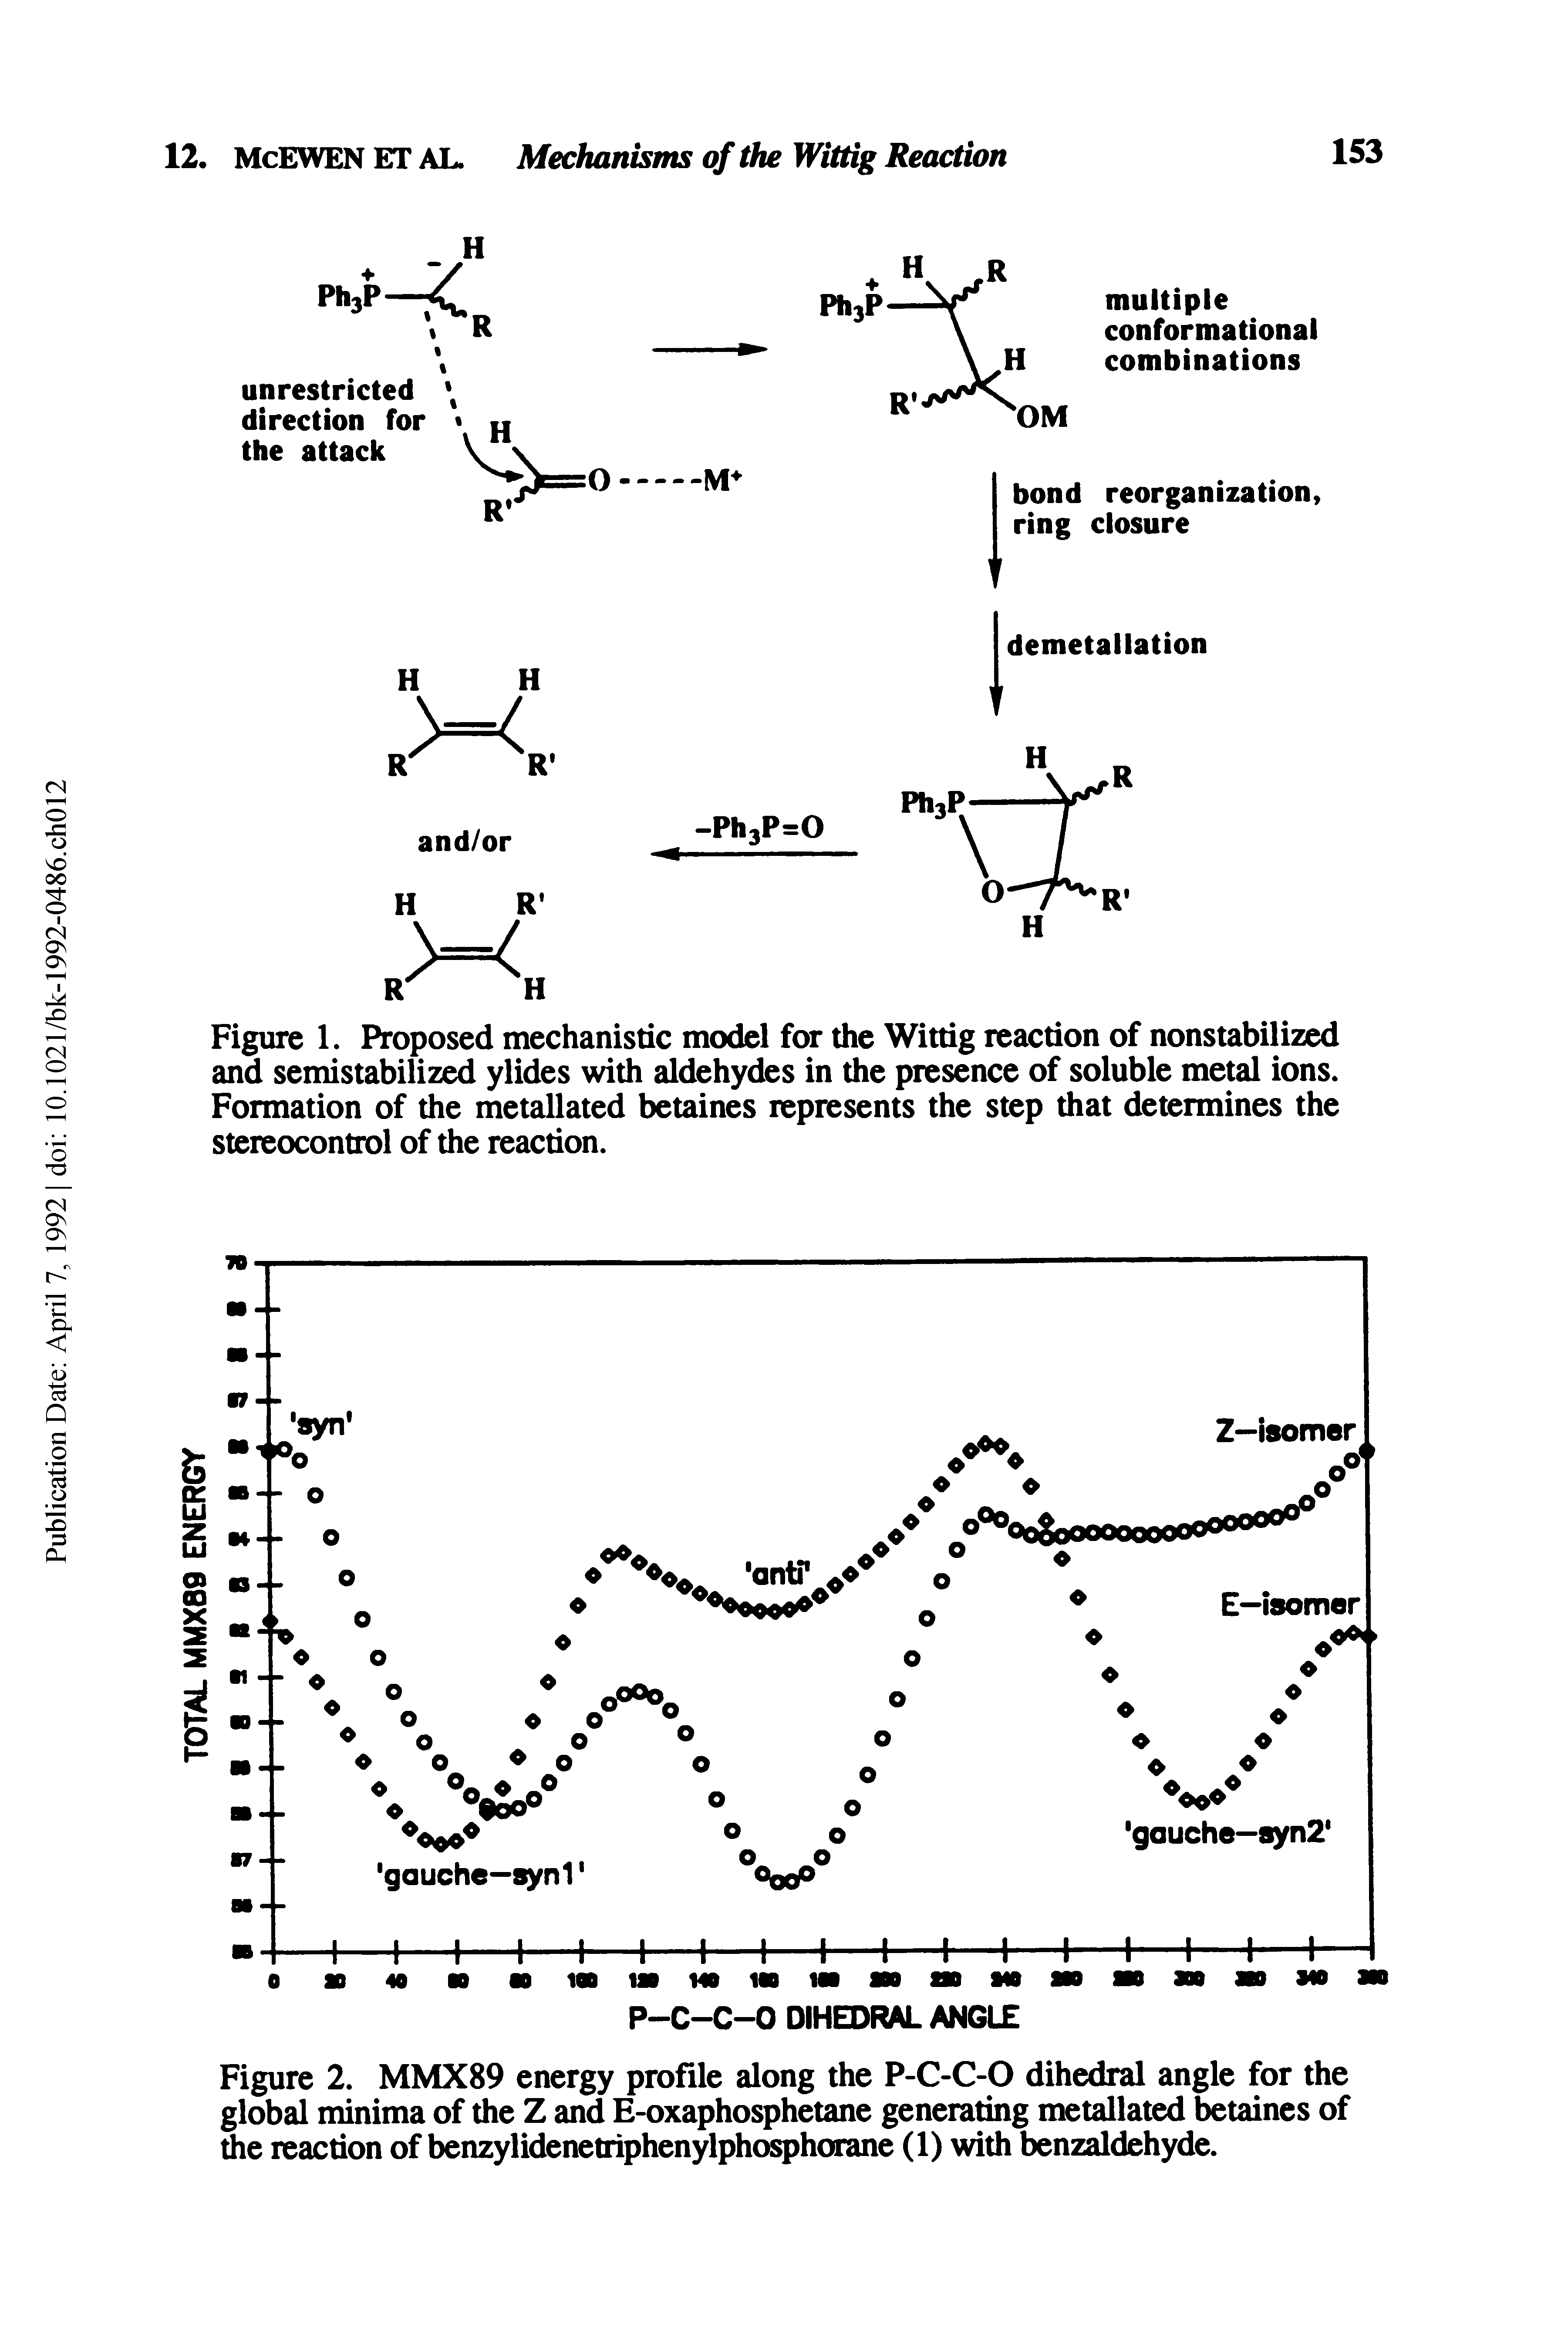 Figure 1. Proposed mechanistic model for the Wittig reaction of nonstabilized and semistabilized ylides with aldehydes in the presence of soluble metal ions. Formation of the metallated betaines represents the step that determines the stereocontrol of the reaction.